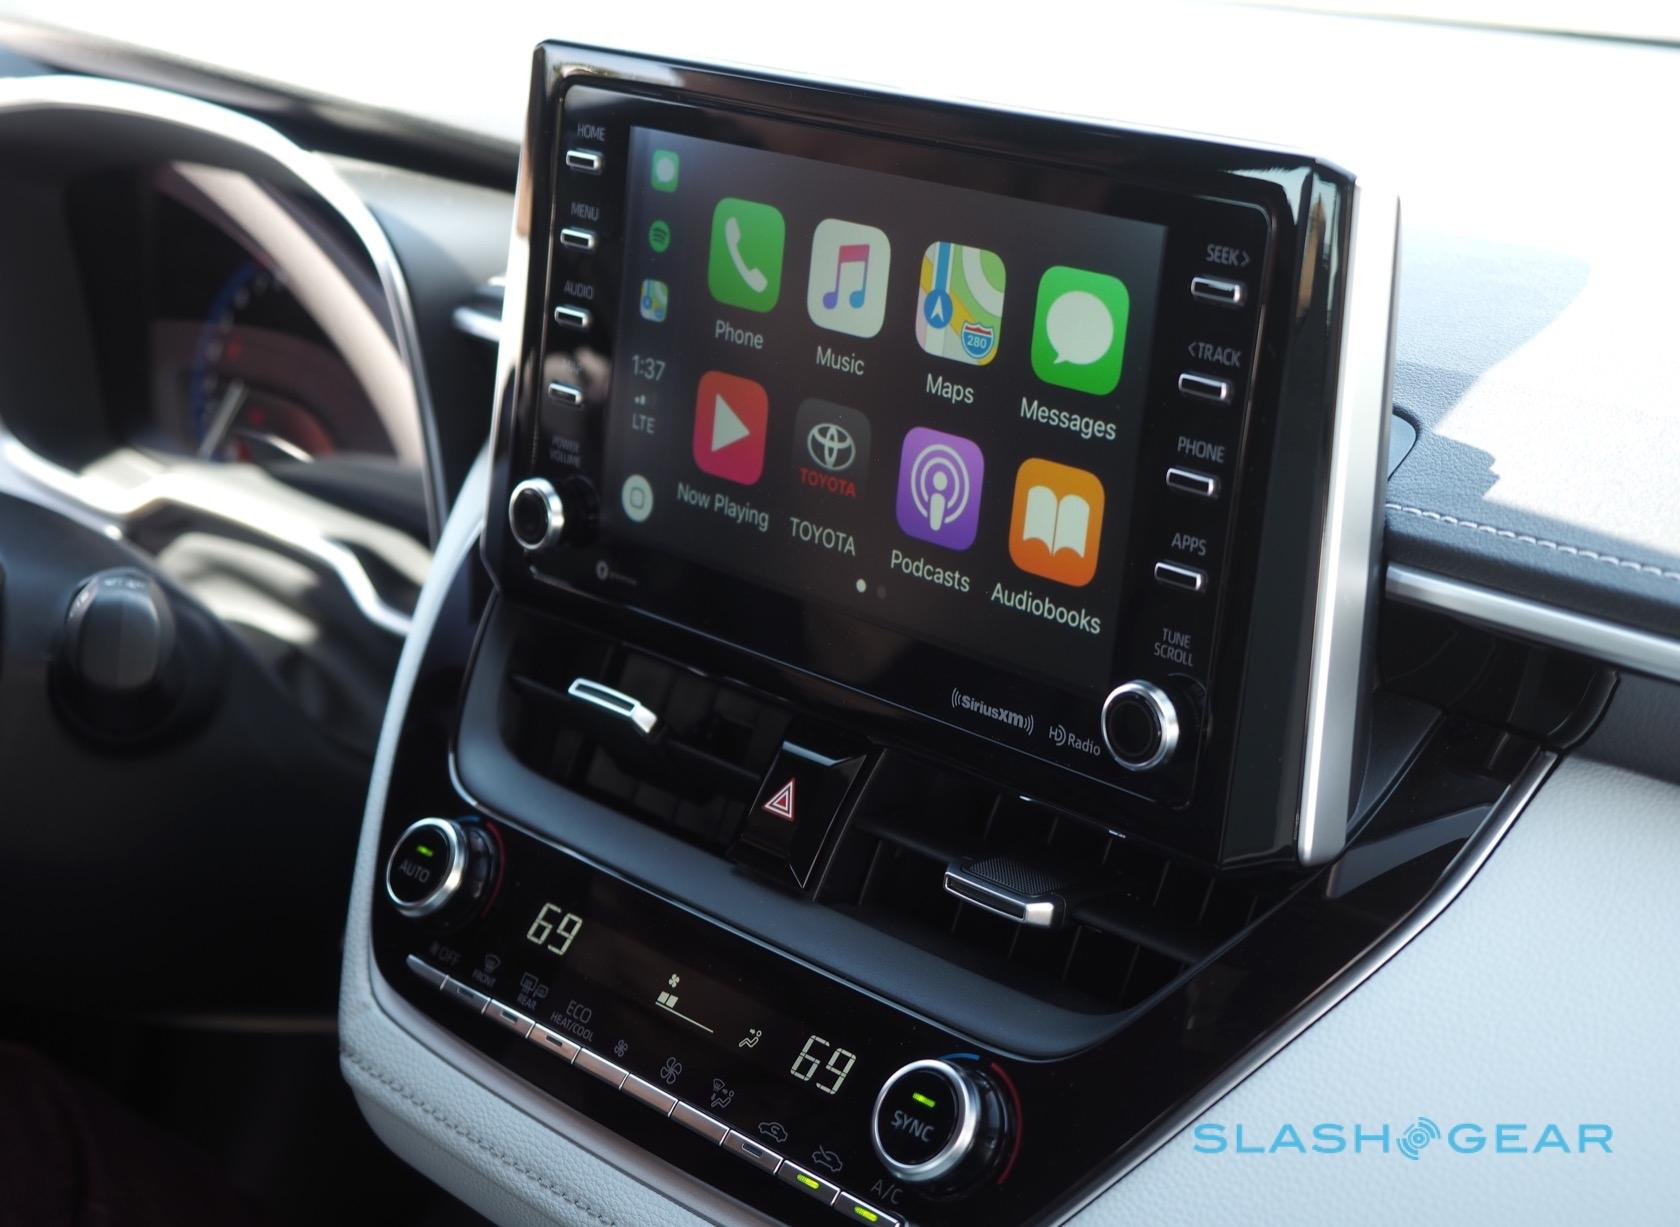 Toyota Android Auto support is reportedly a done deal